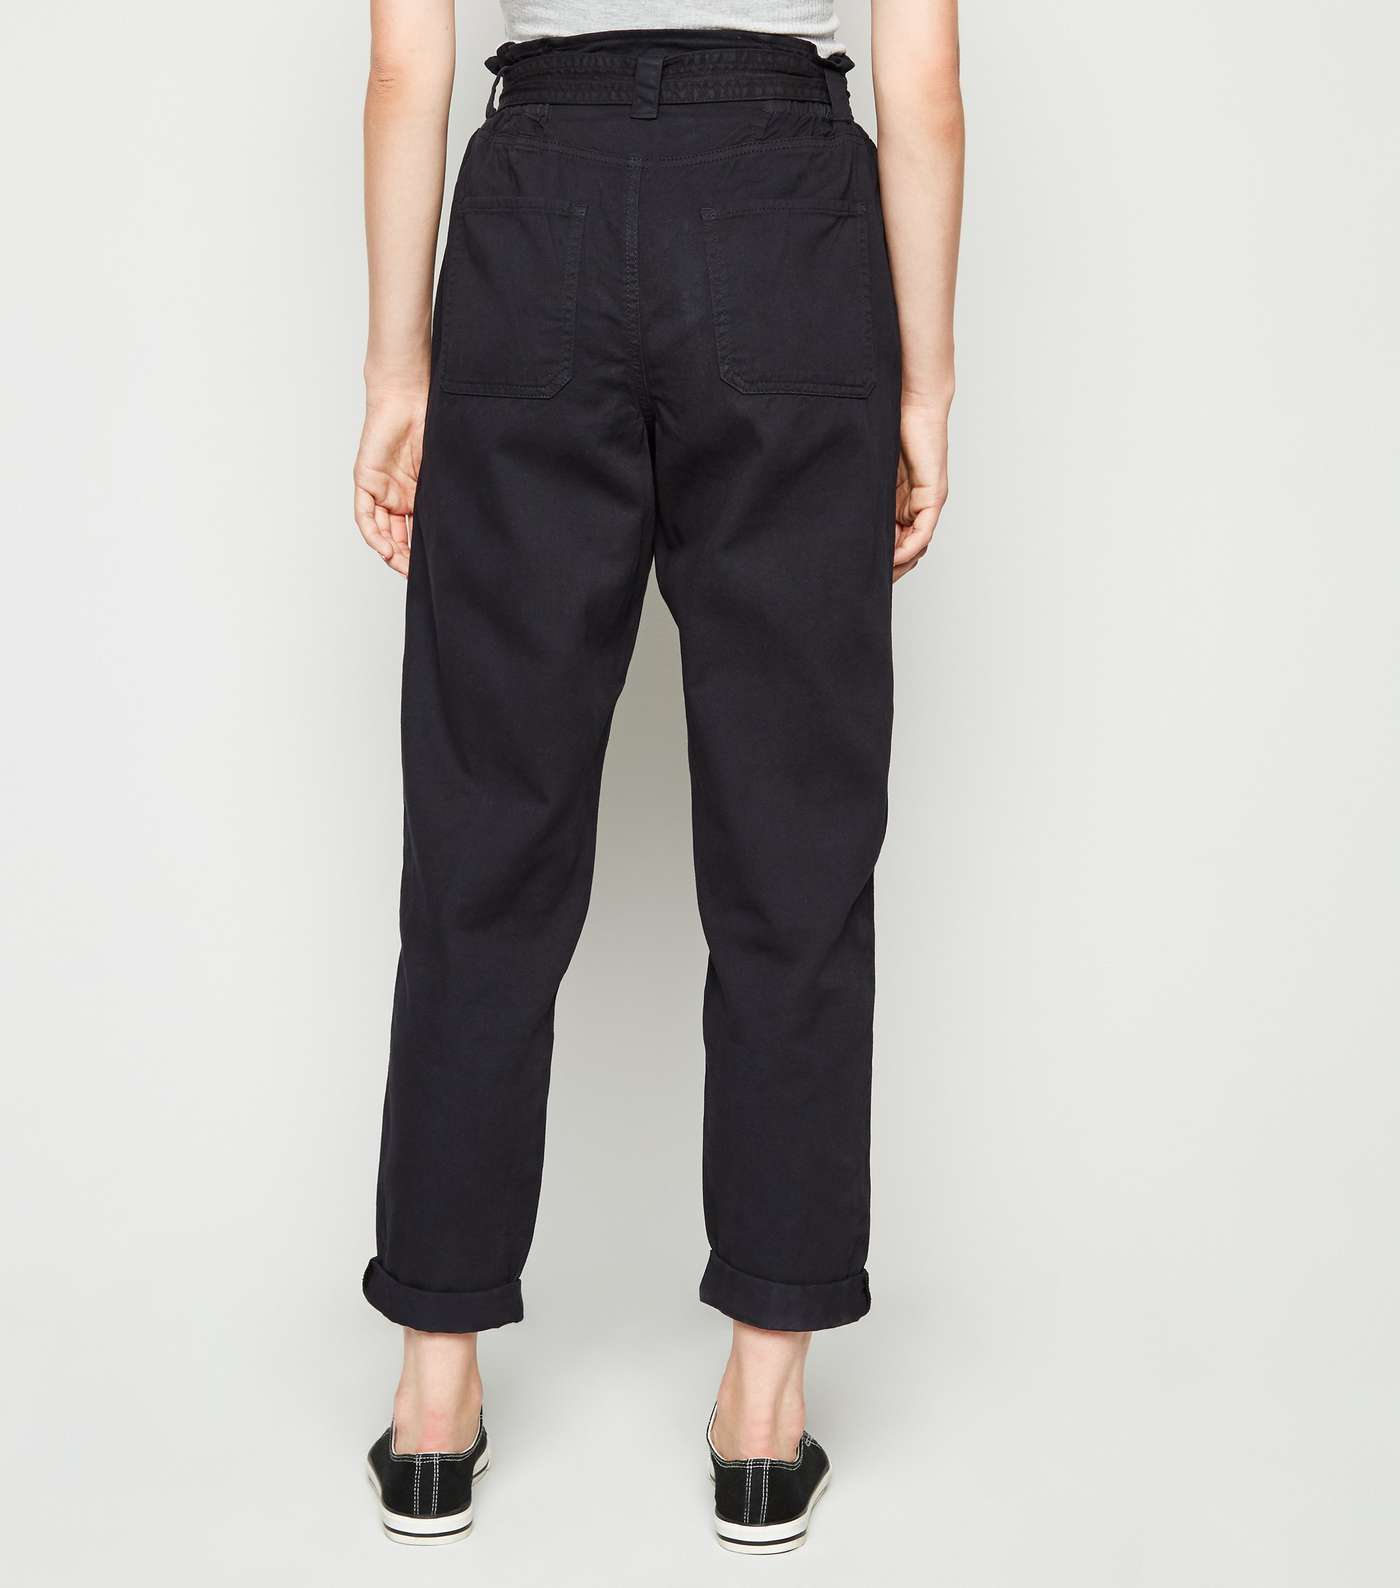 Black Denim High Waist Belted Utility Trousers Image 3